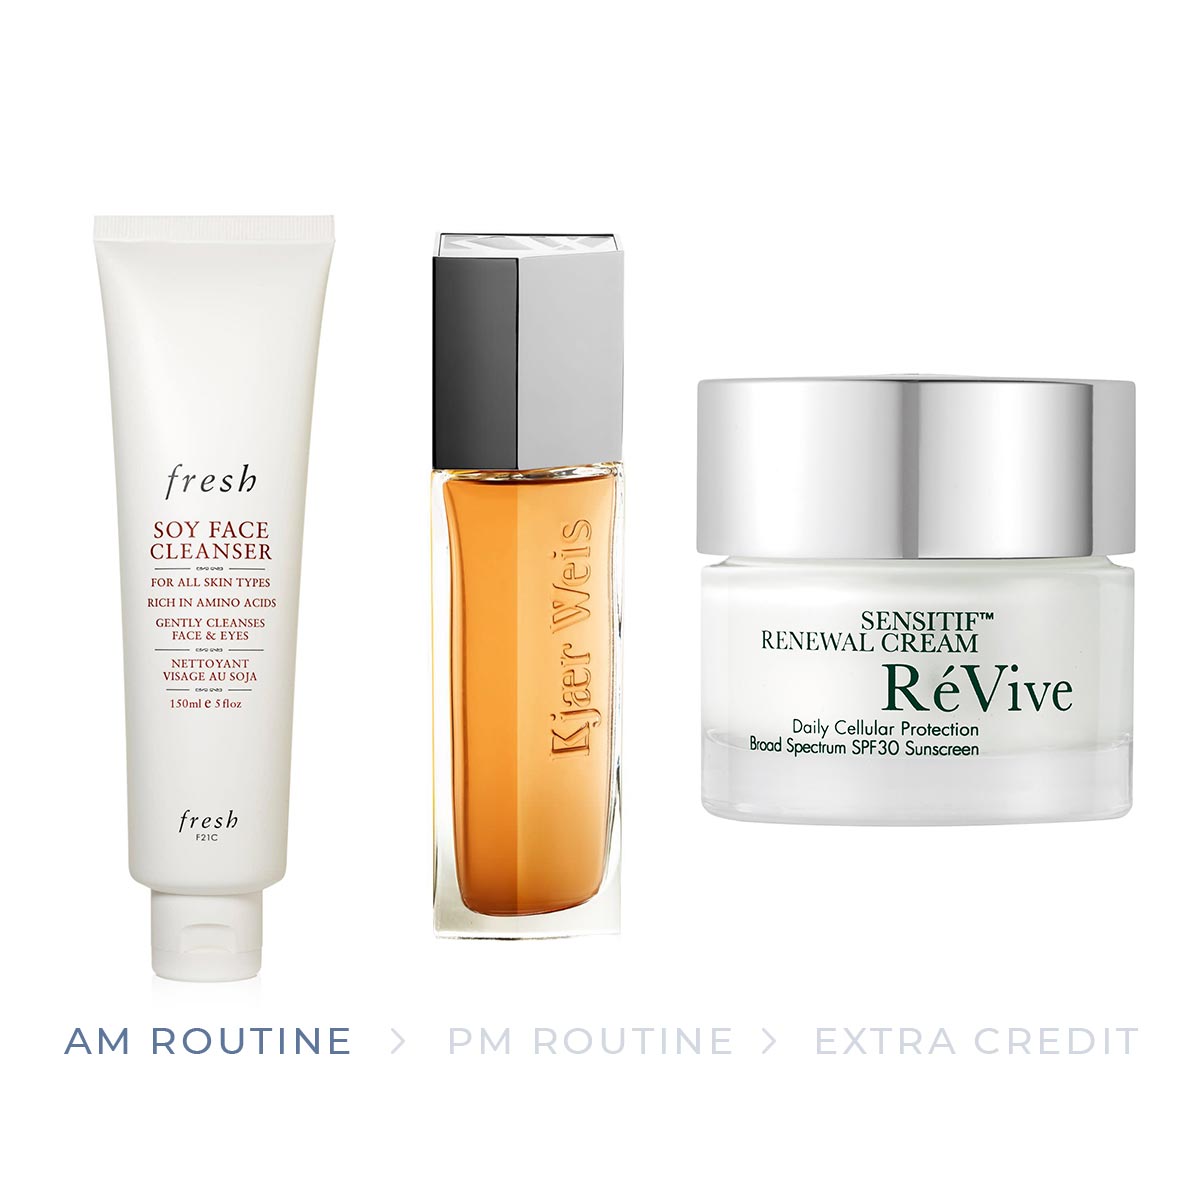 The products for the AM part of the oily skin skincare routine